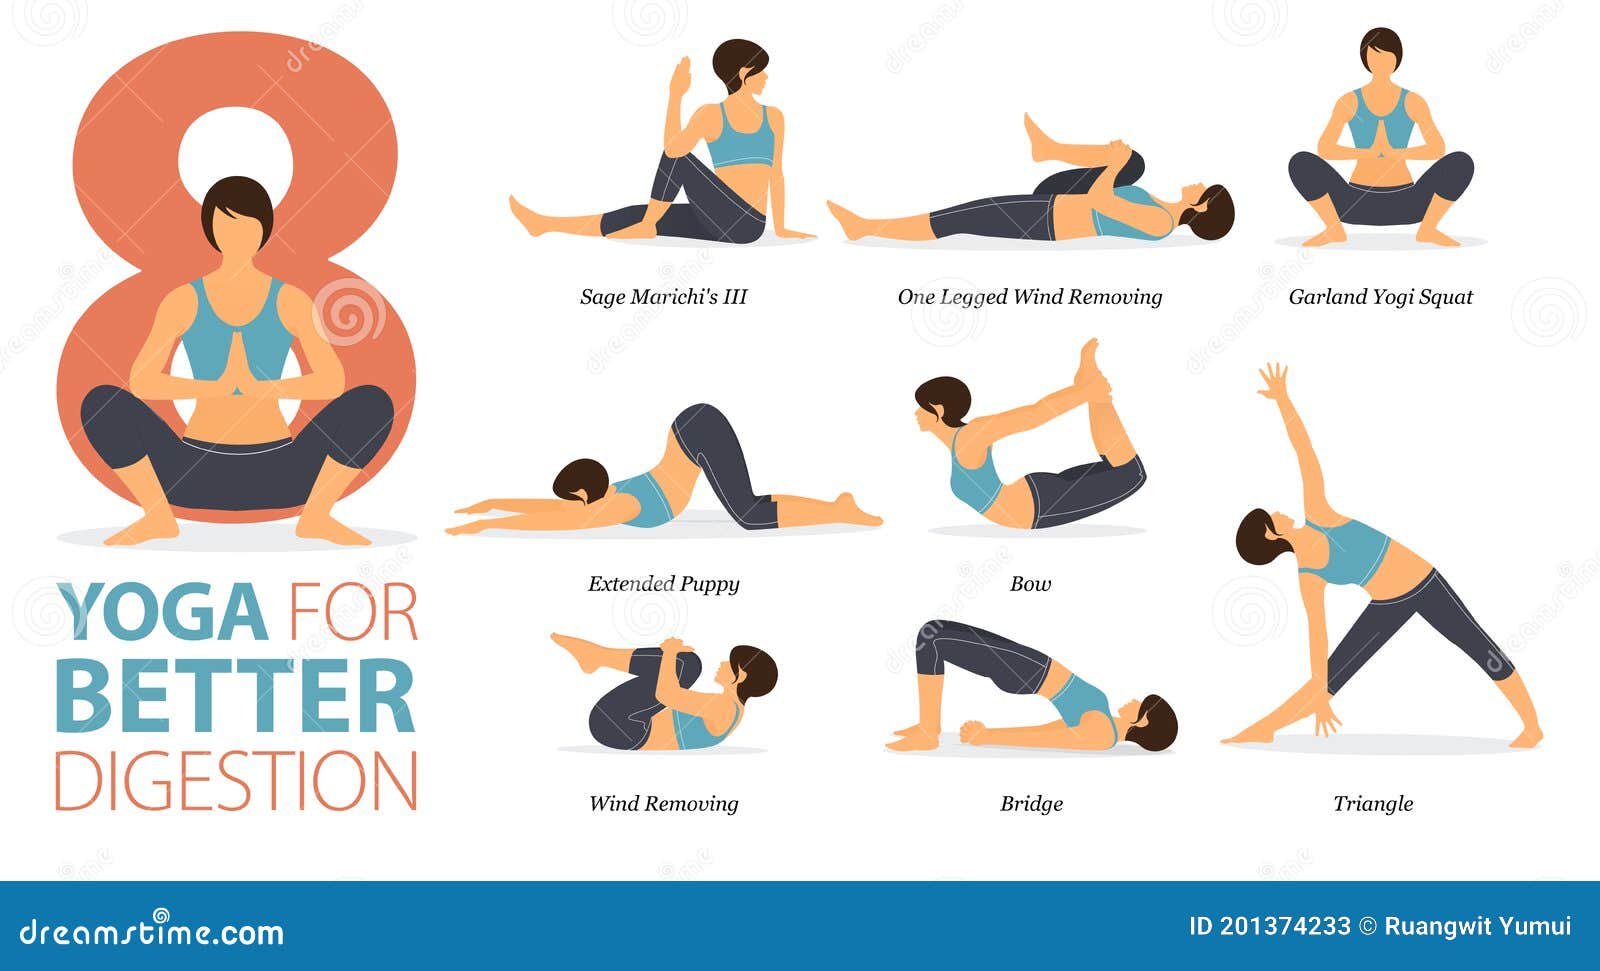 8 Yoga Poses or Asana Posture for Workout in Better Digestion Concept.  Women Exercising for Body Stretching. Fitness Infographic. Stock Vector -  Illustration of character, body: 201374233